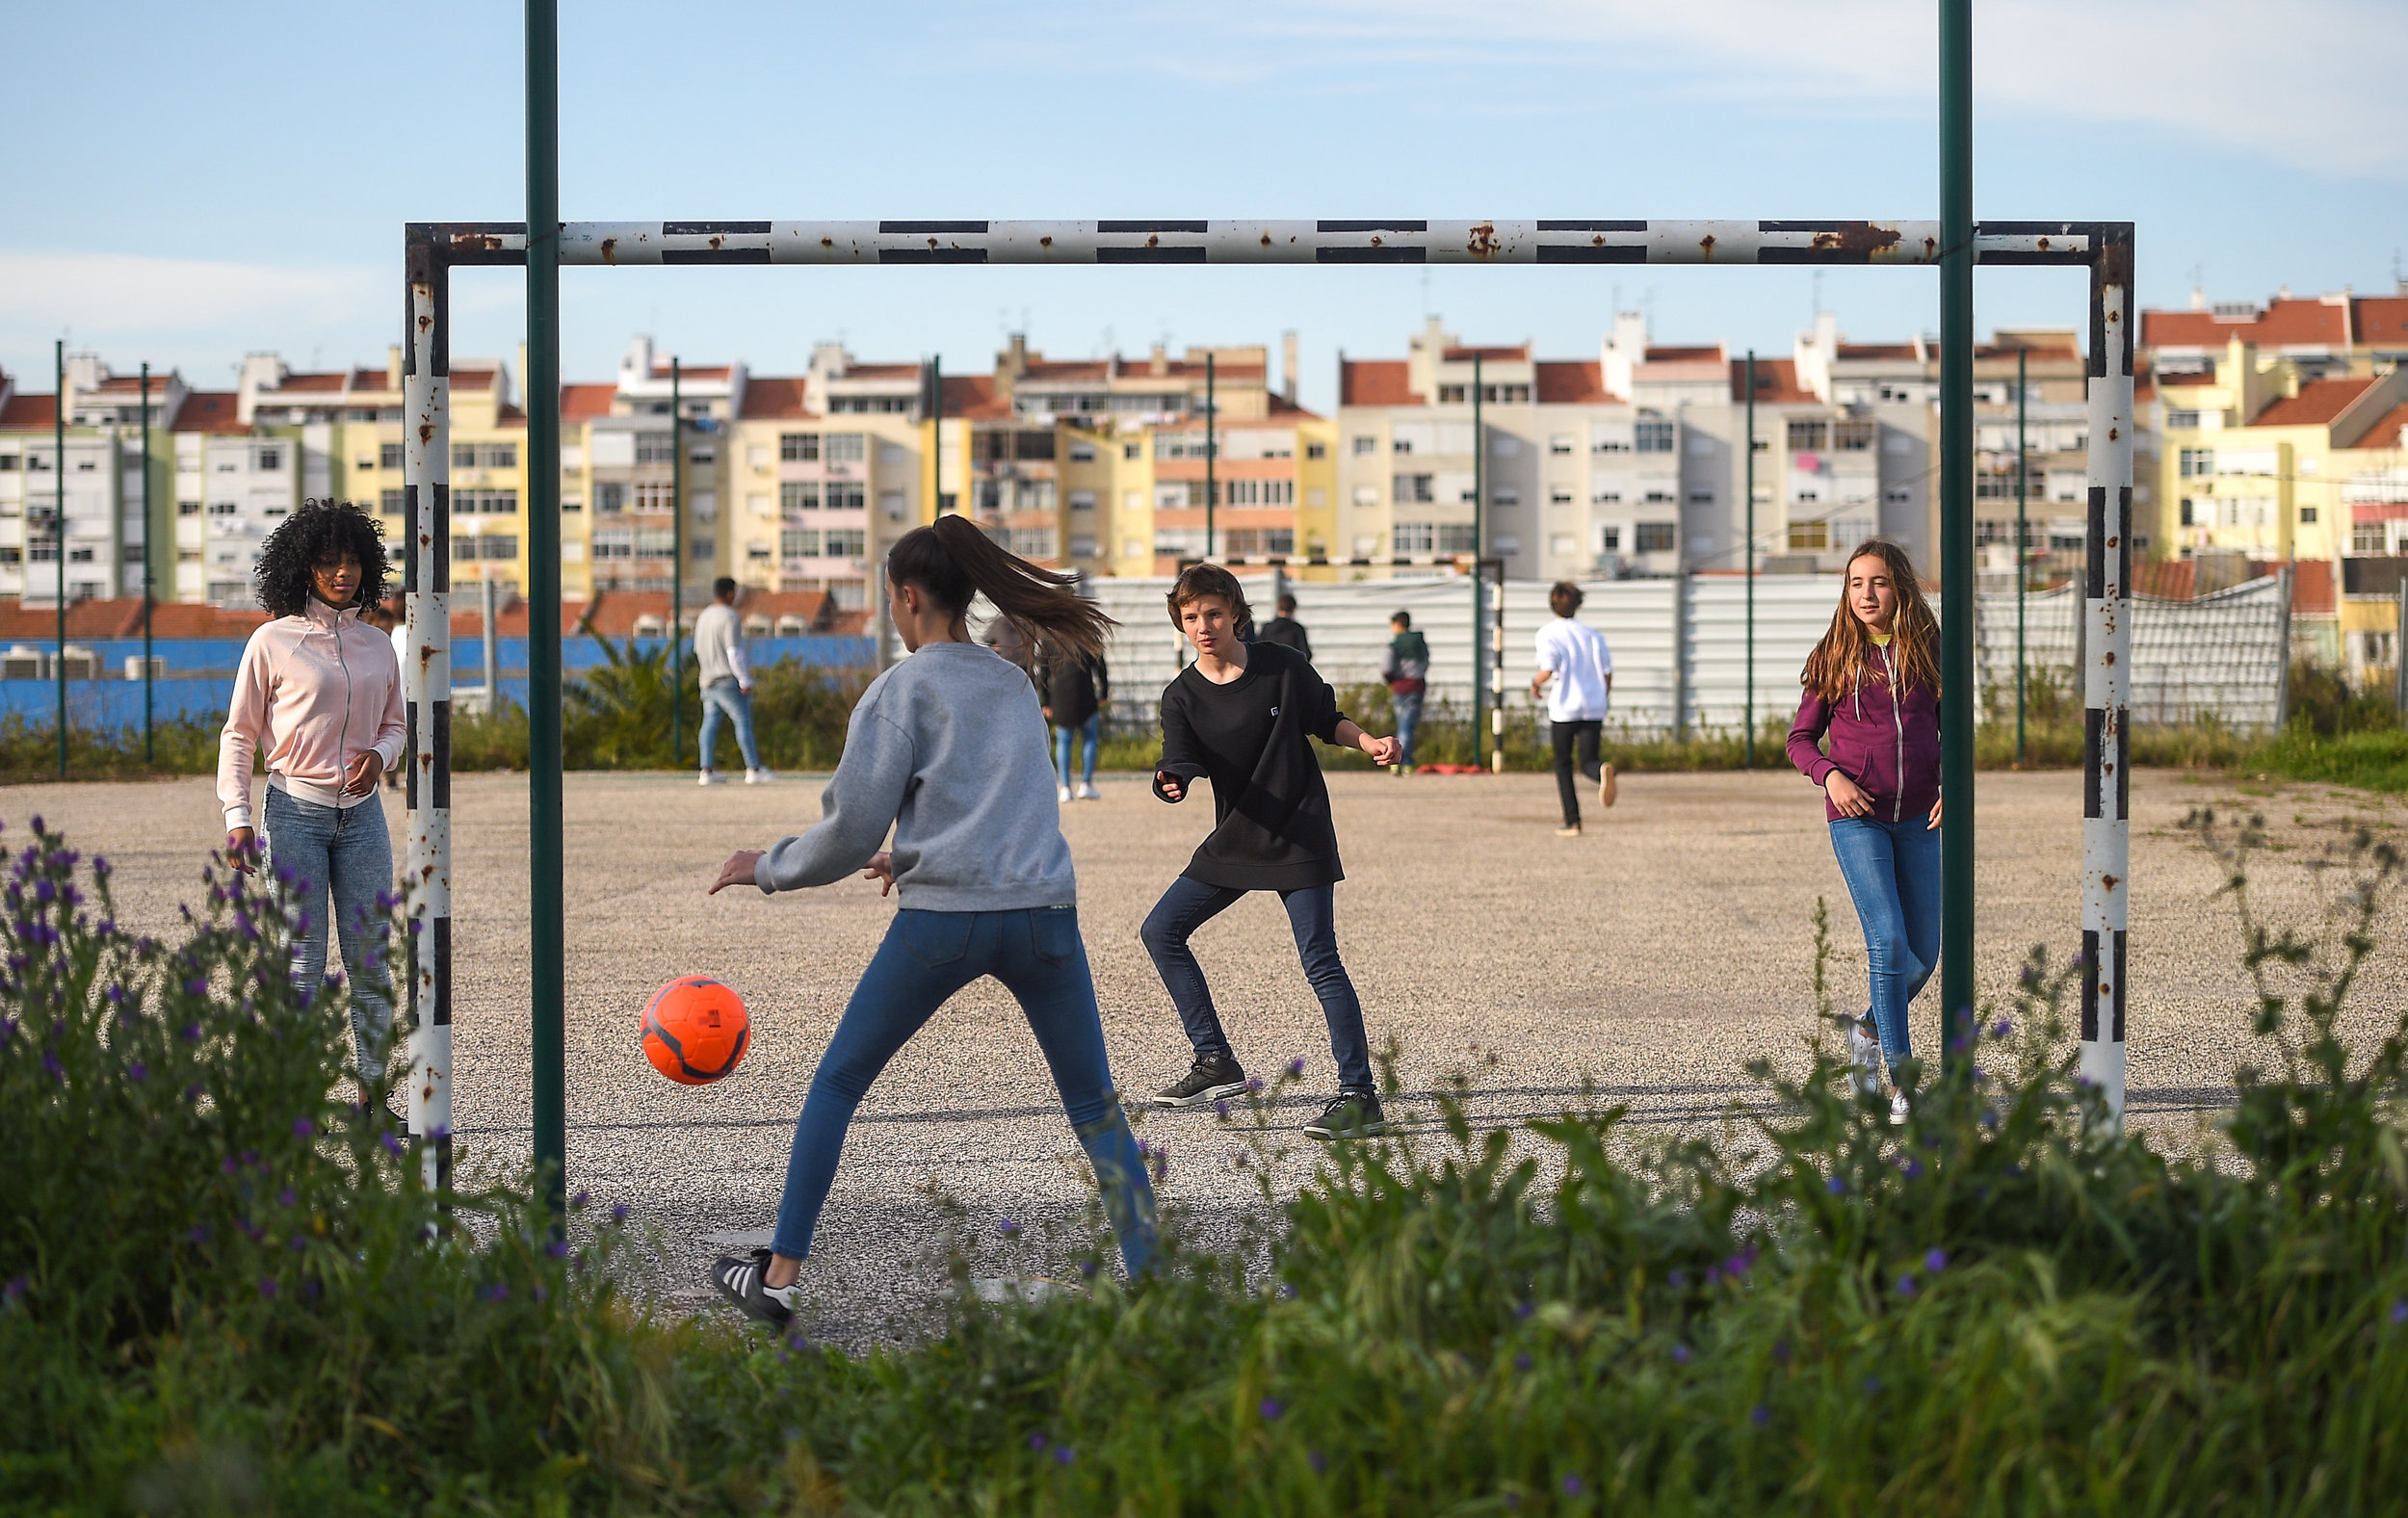  Students play football during recess in Lisbon, Portugal 2017  / UEFA / Sportsfile  